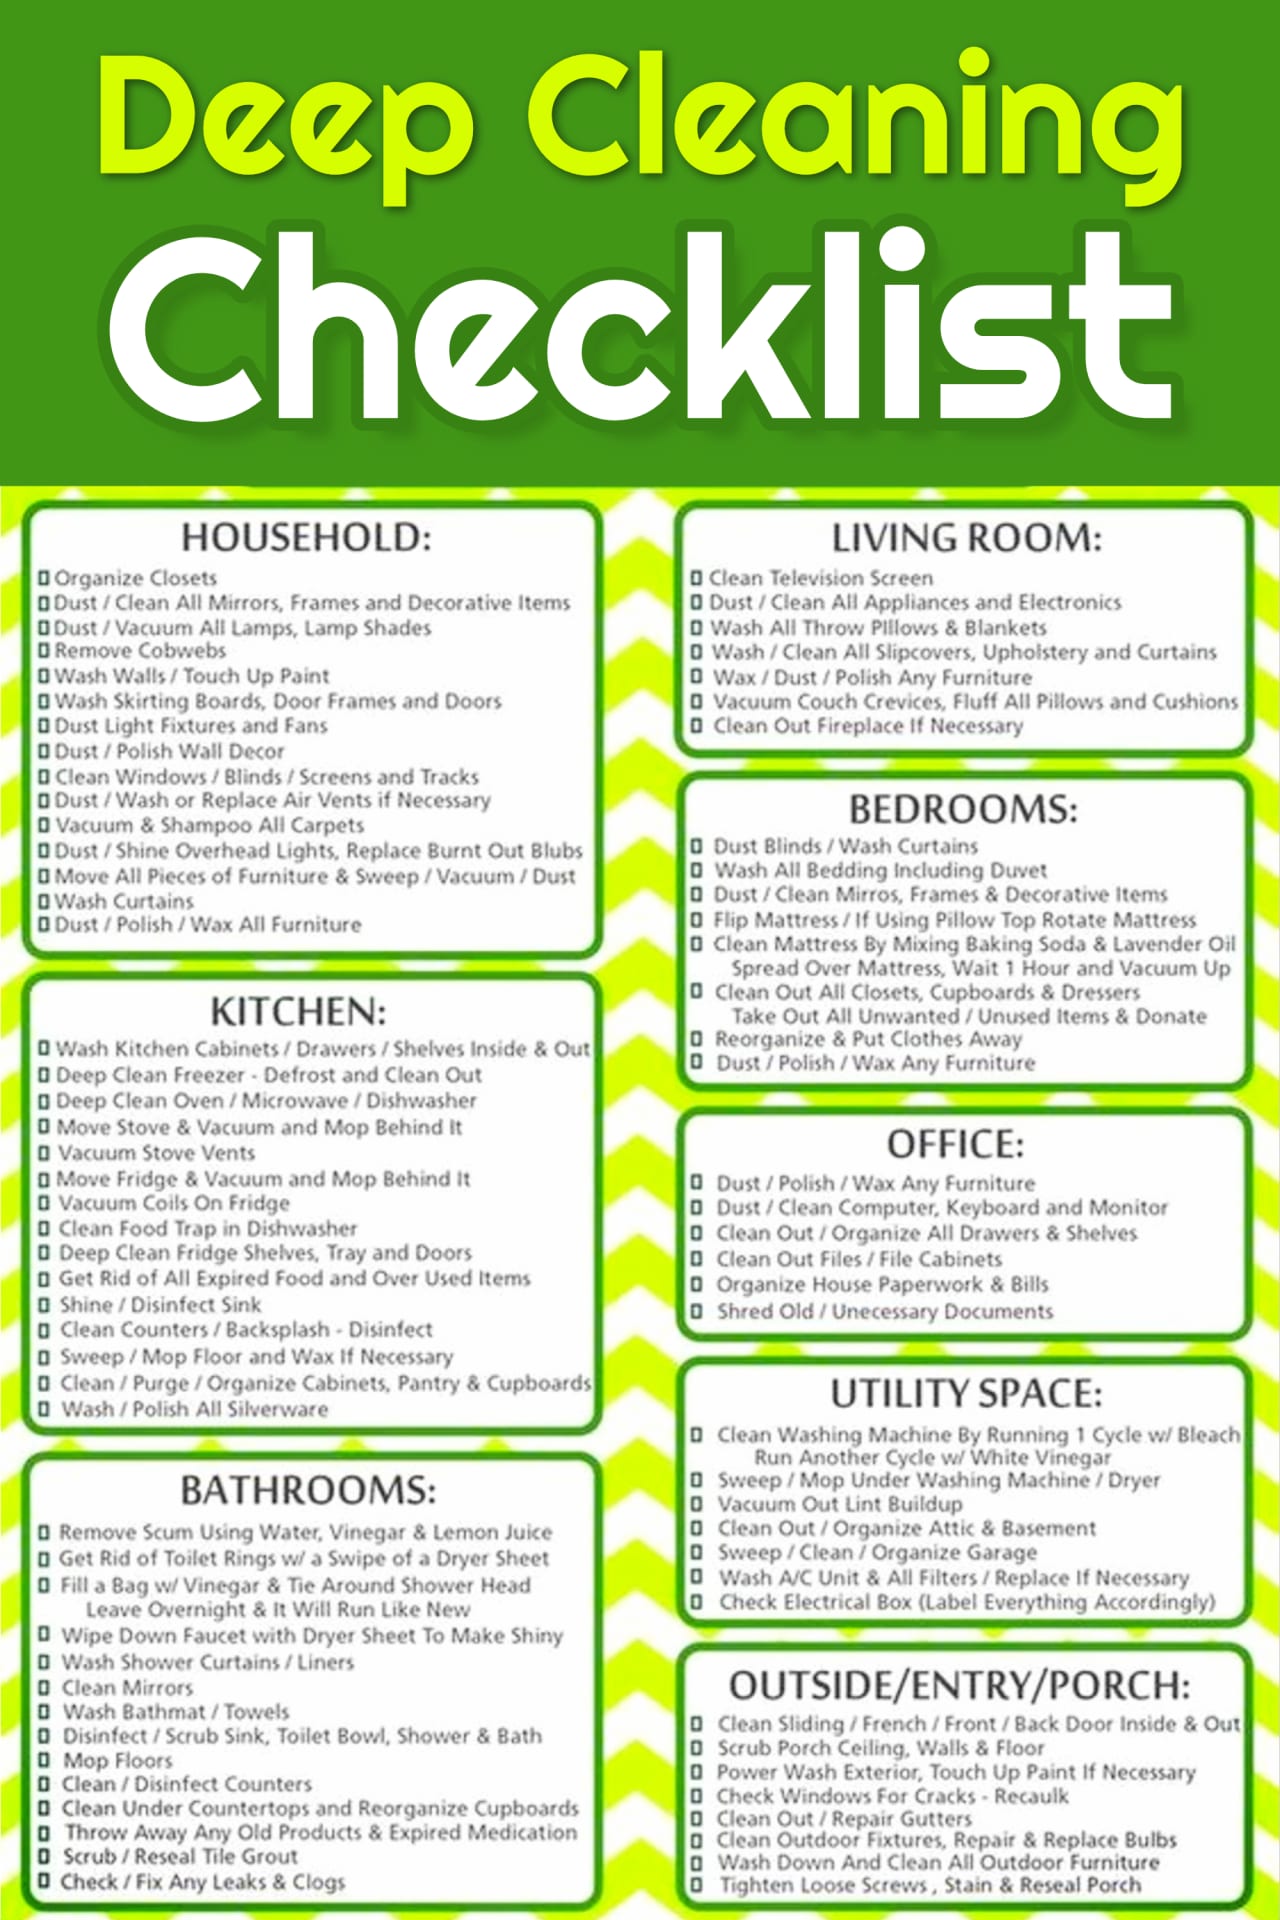 Deep Cleaning Checklist (free!) Deep Clean Your House or apartment! Free deep clean your house Checklist Printable - Free deep cleaning checklist - How to deep clean your house checklist with deep cleaning tasks for deep cleaning house like deep cleaning services Professionals - Deep cleaning list house, deep cleaning apartment, What IS deep cleaning and Deep Cleaning vs Regular Cleaning -  whole house deep cleaning, deep cleaning checklist pdf, initial cleaning checklist